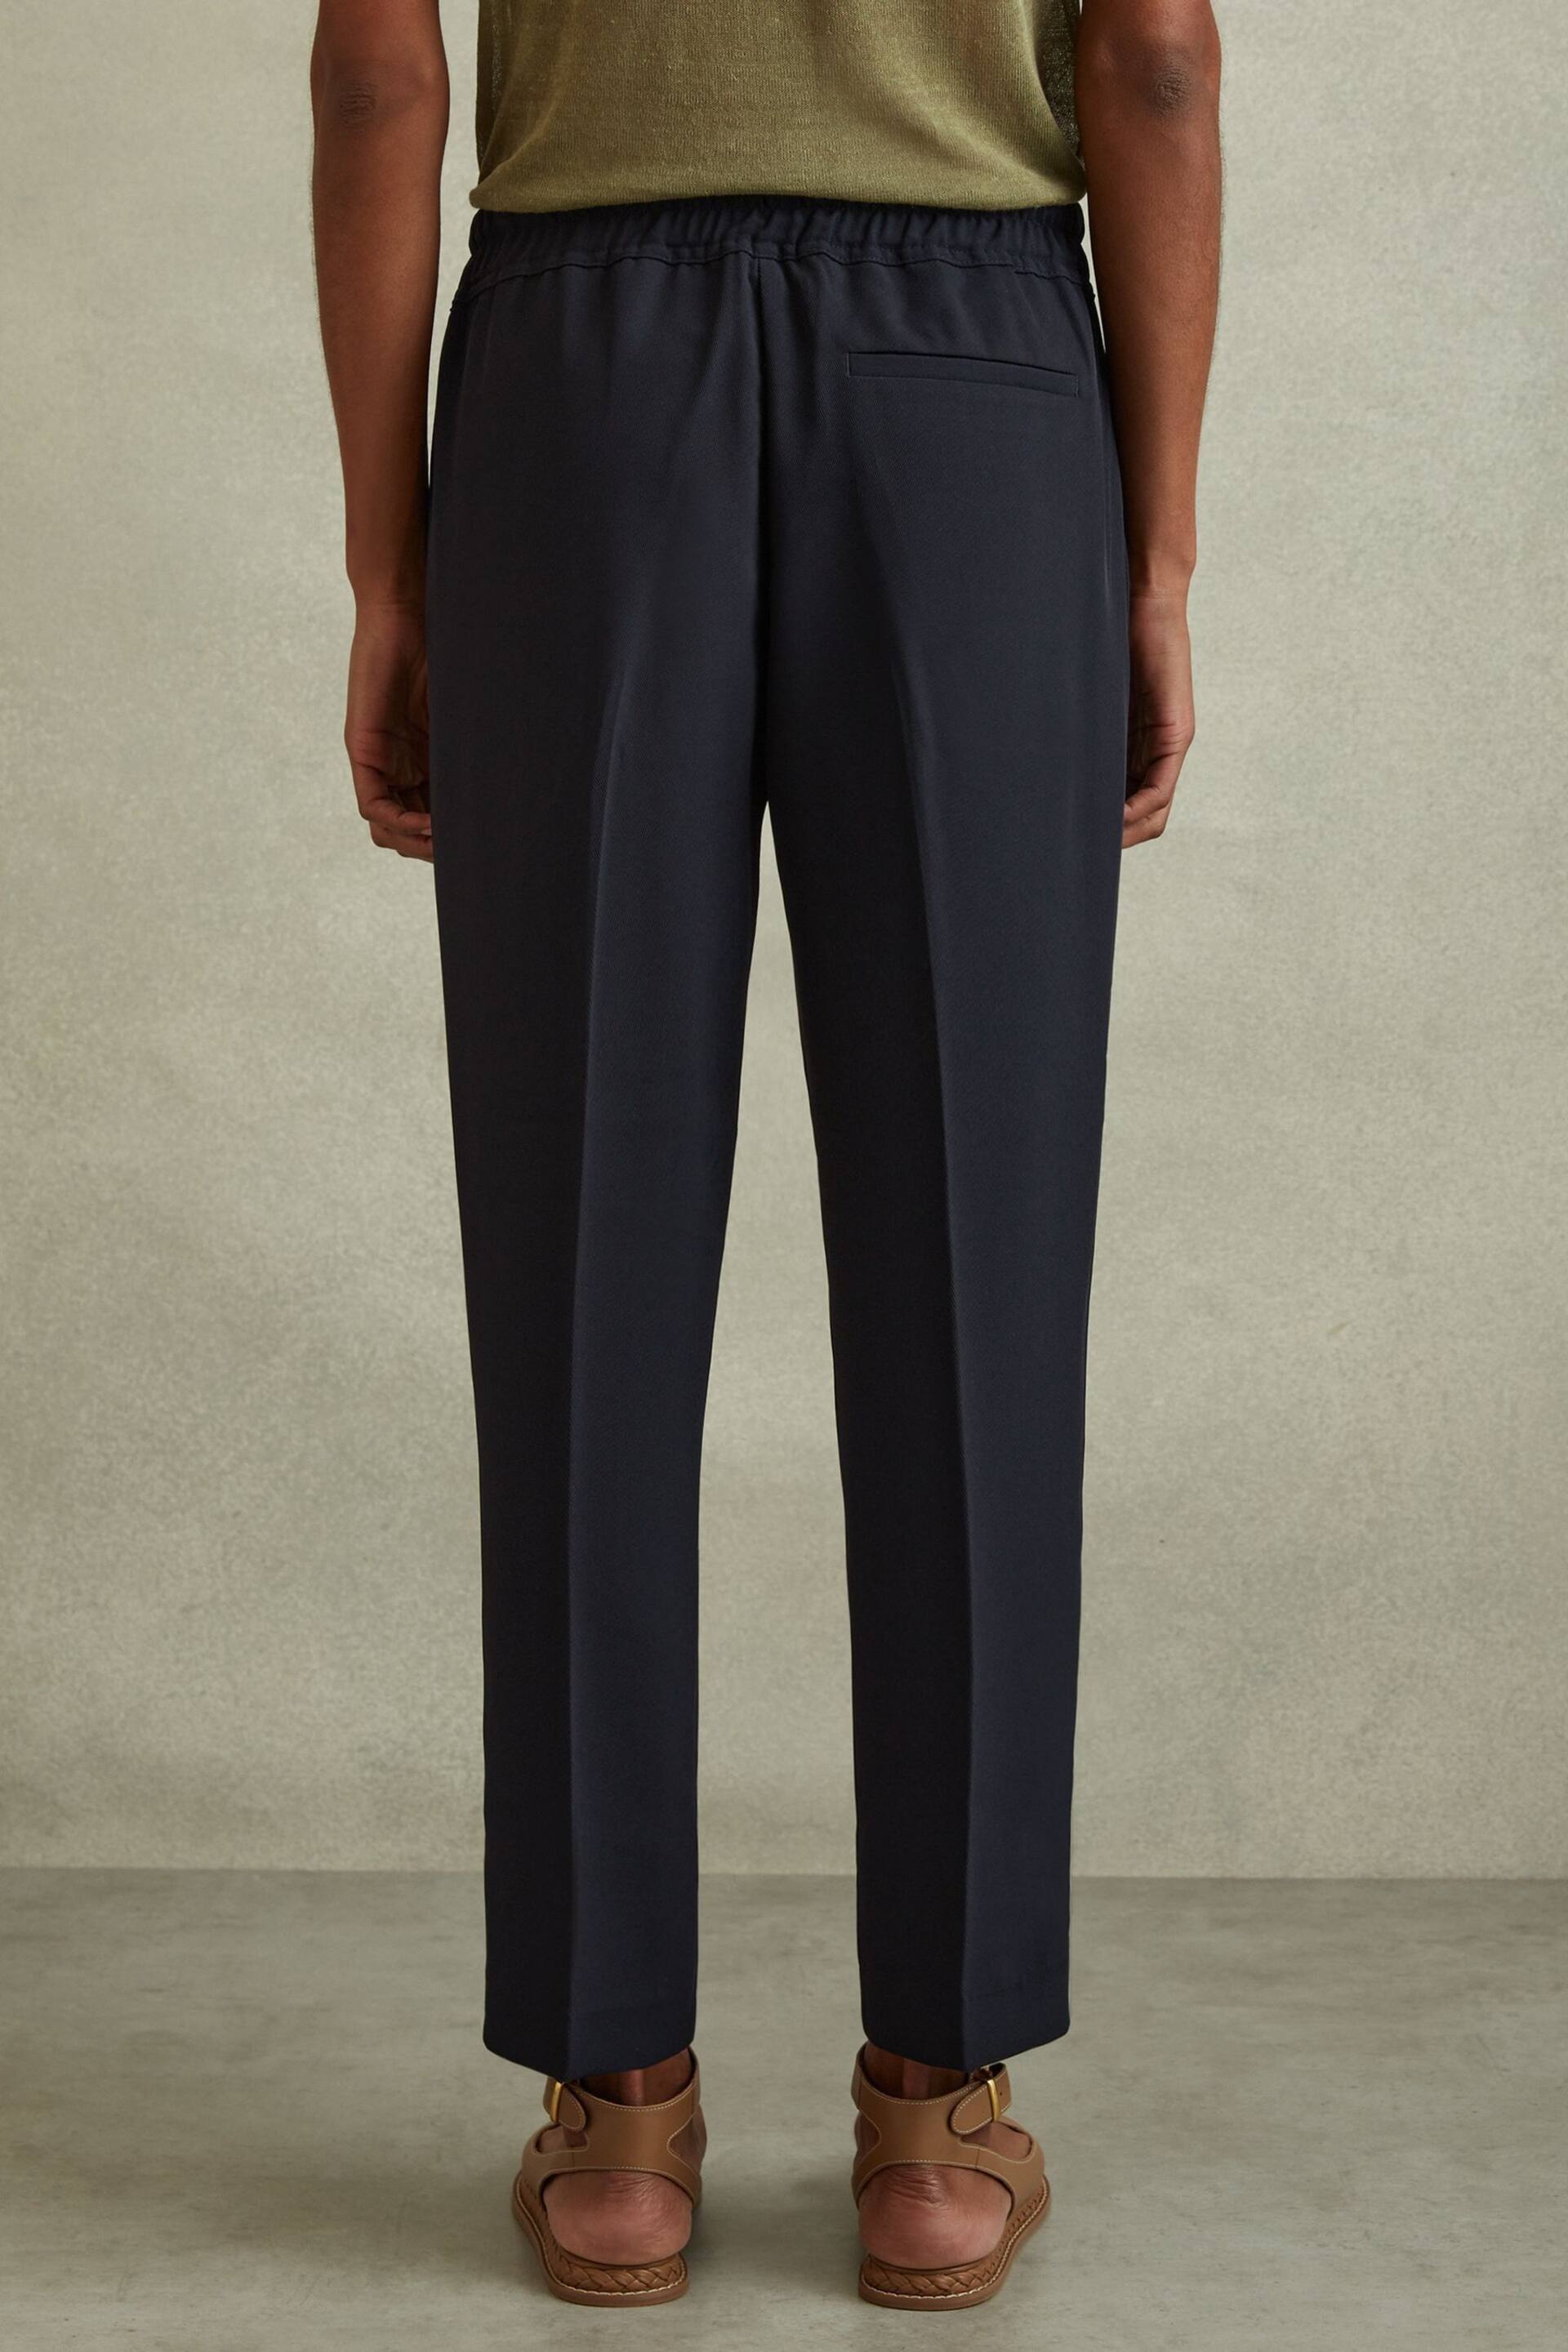 Reiss Navy Hailey Petite Tapered Pull On Trousers - Image 4 of 6